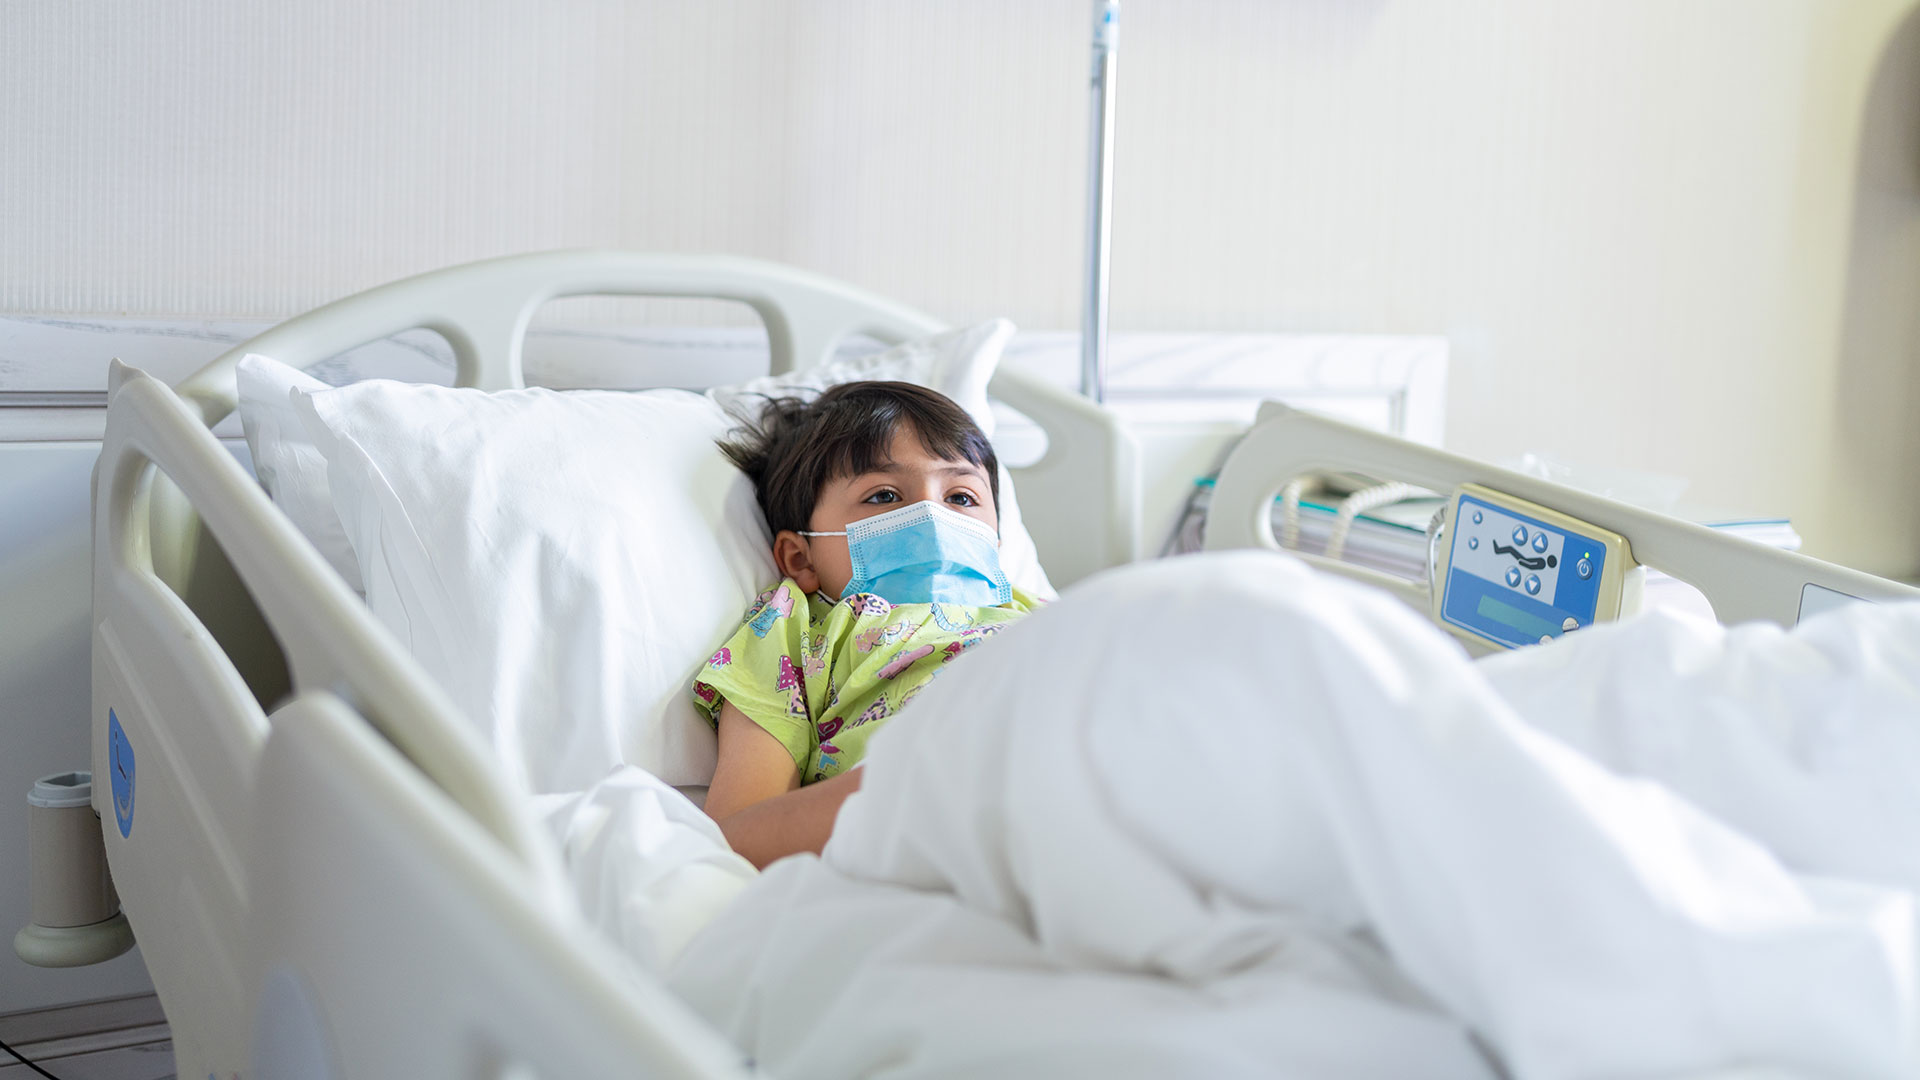 Specialist Alyssa Hahn's research on errors or noise in communication with parents of hospitalized children confirms that poor communication between parents of pediatric patients and health professionals leads to adverse events (Getty Images)